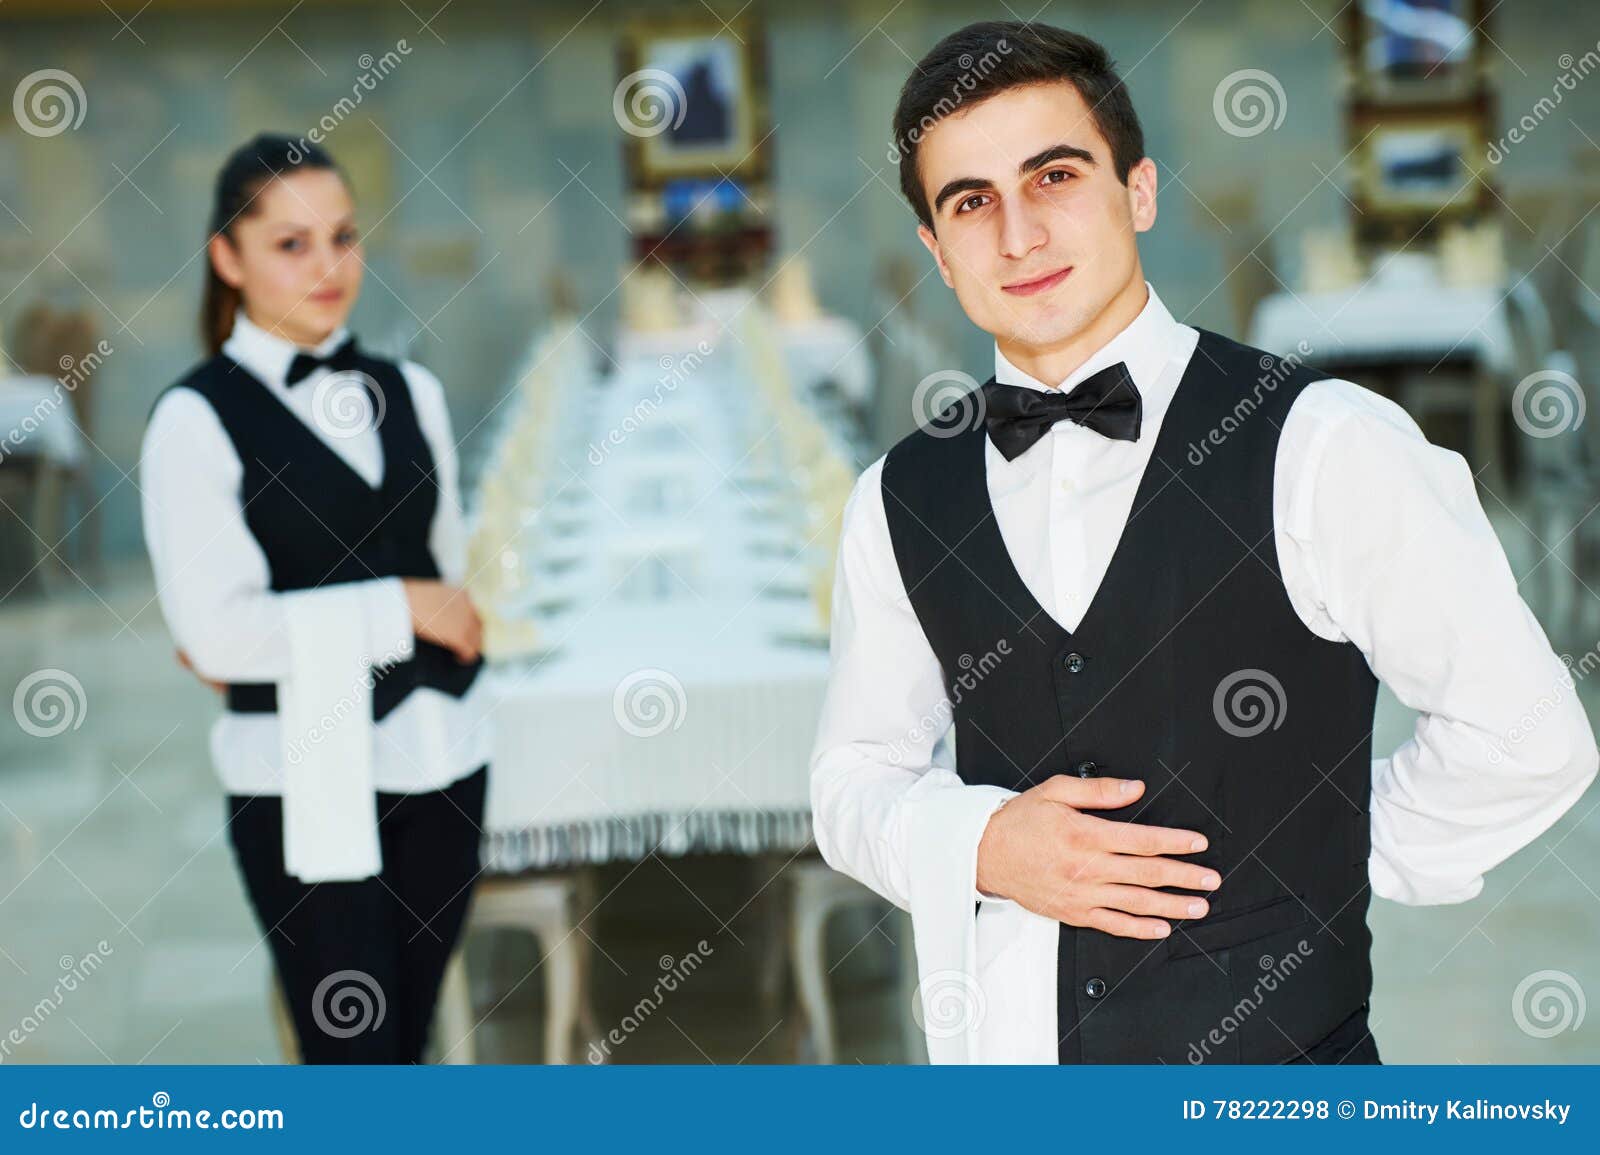 young waiter and waitress at service in restaurant